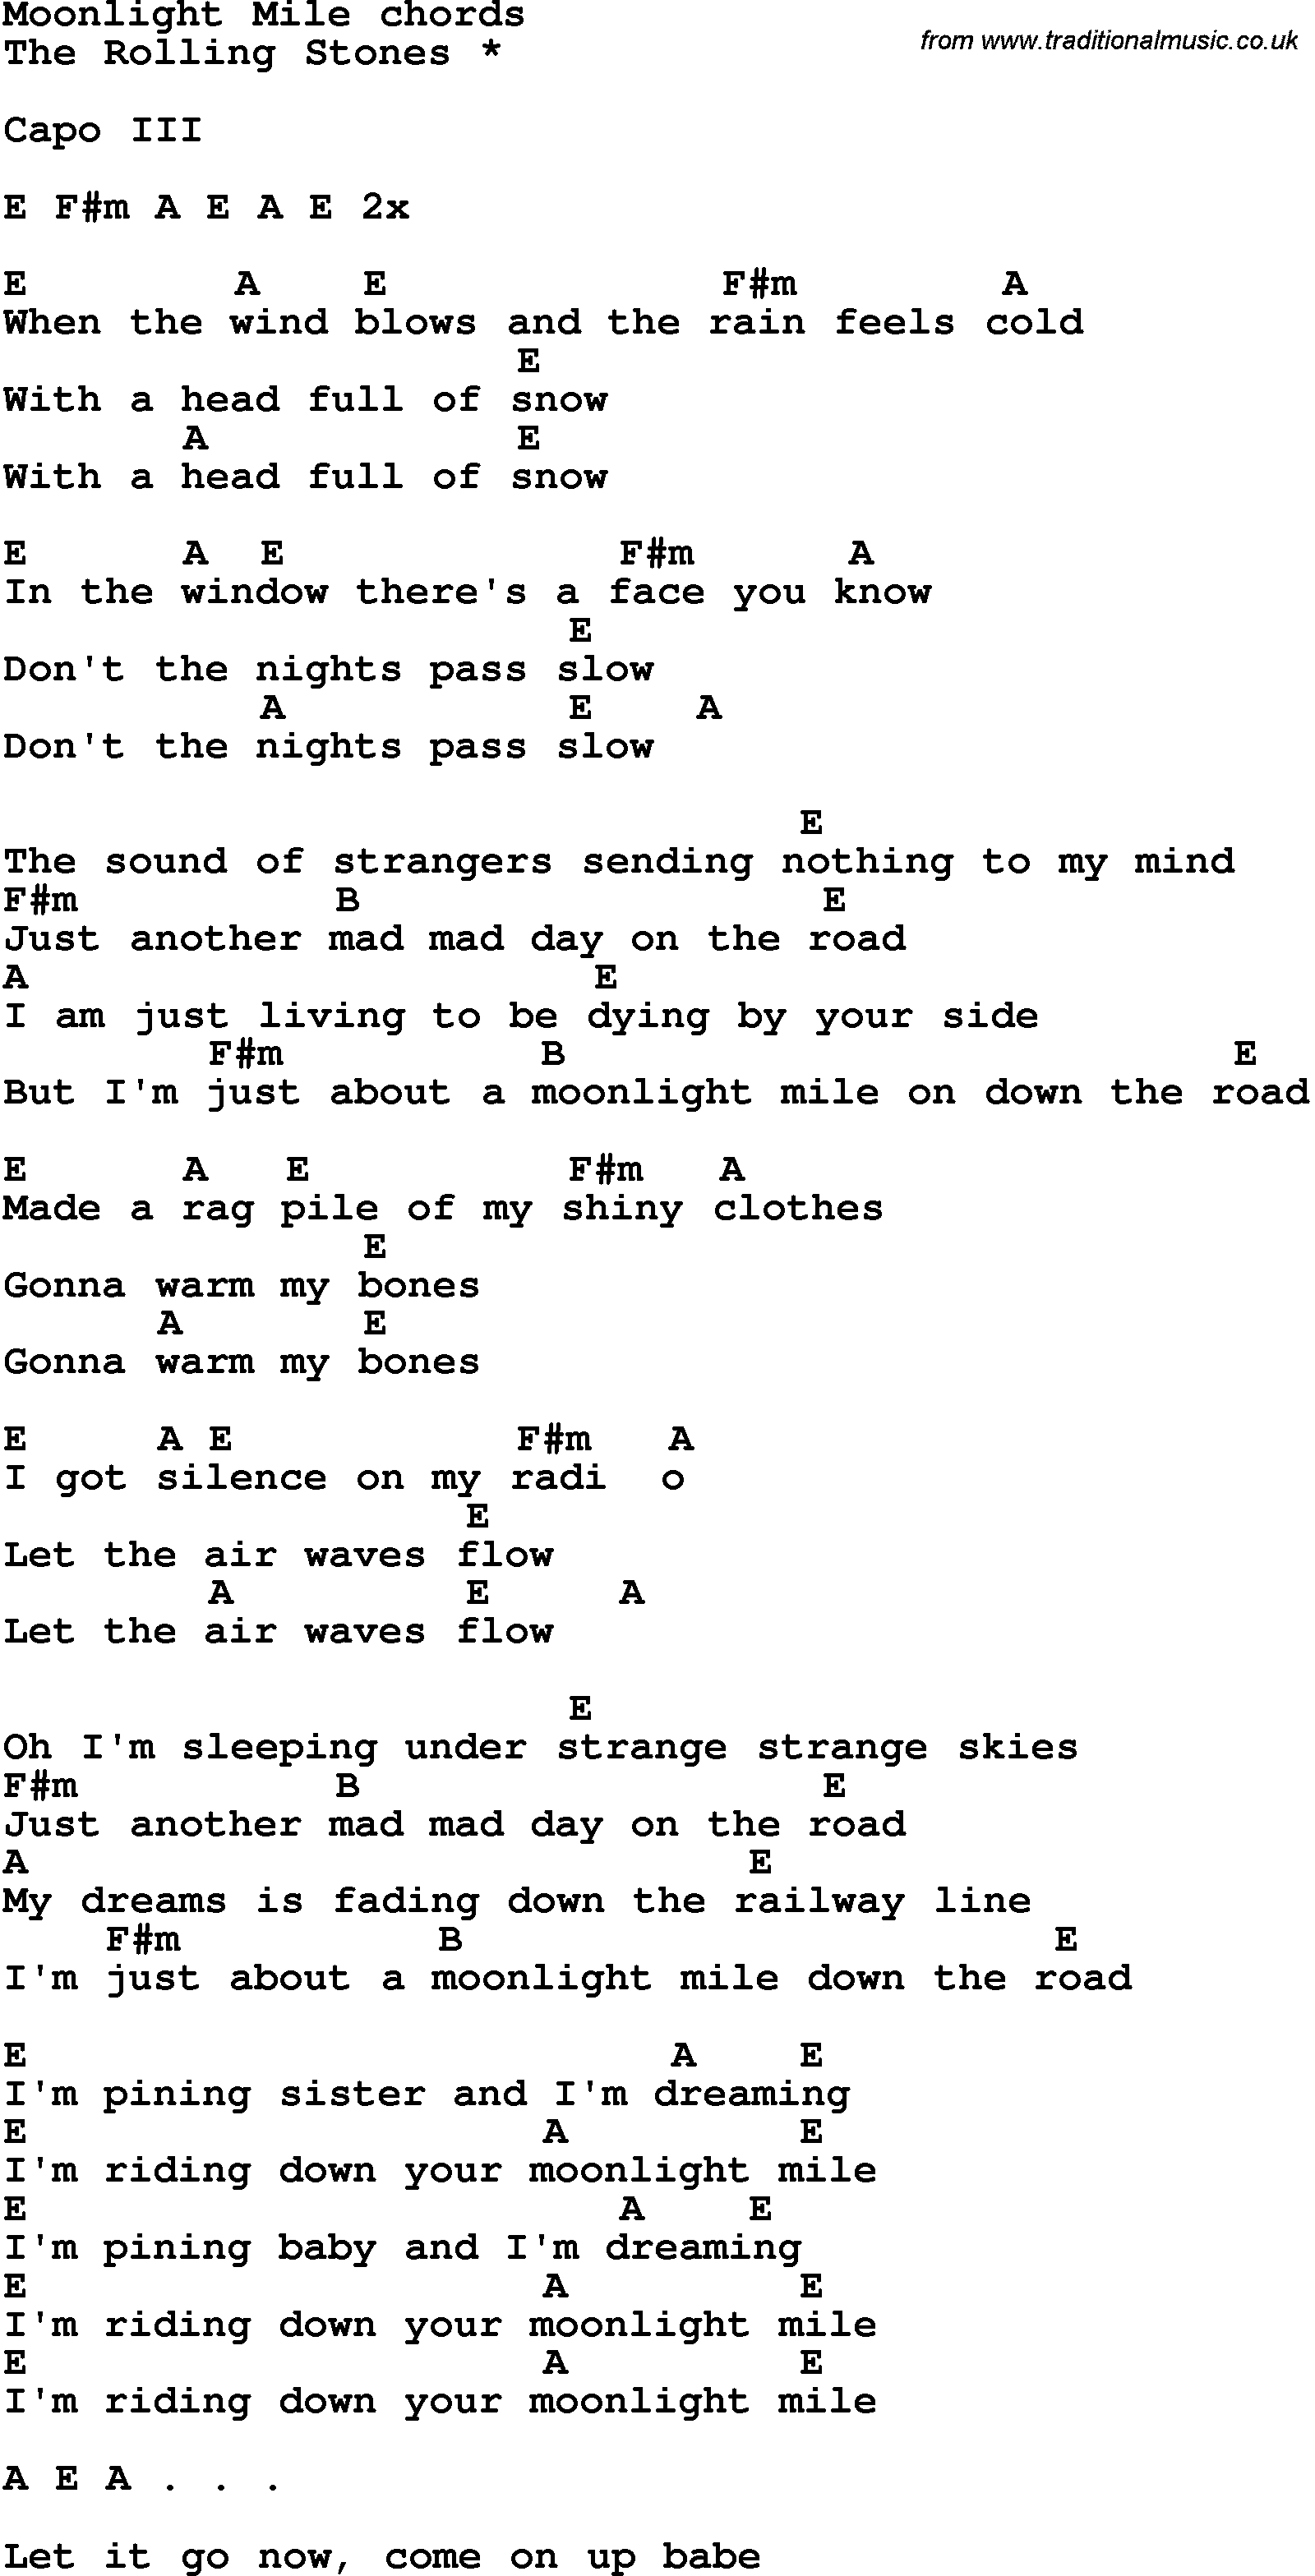 Song Lyrics with guitar chords for Moonlight Mile